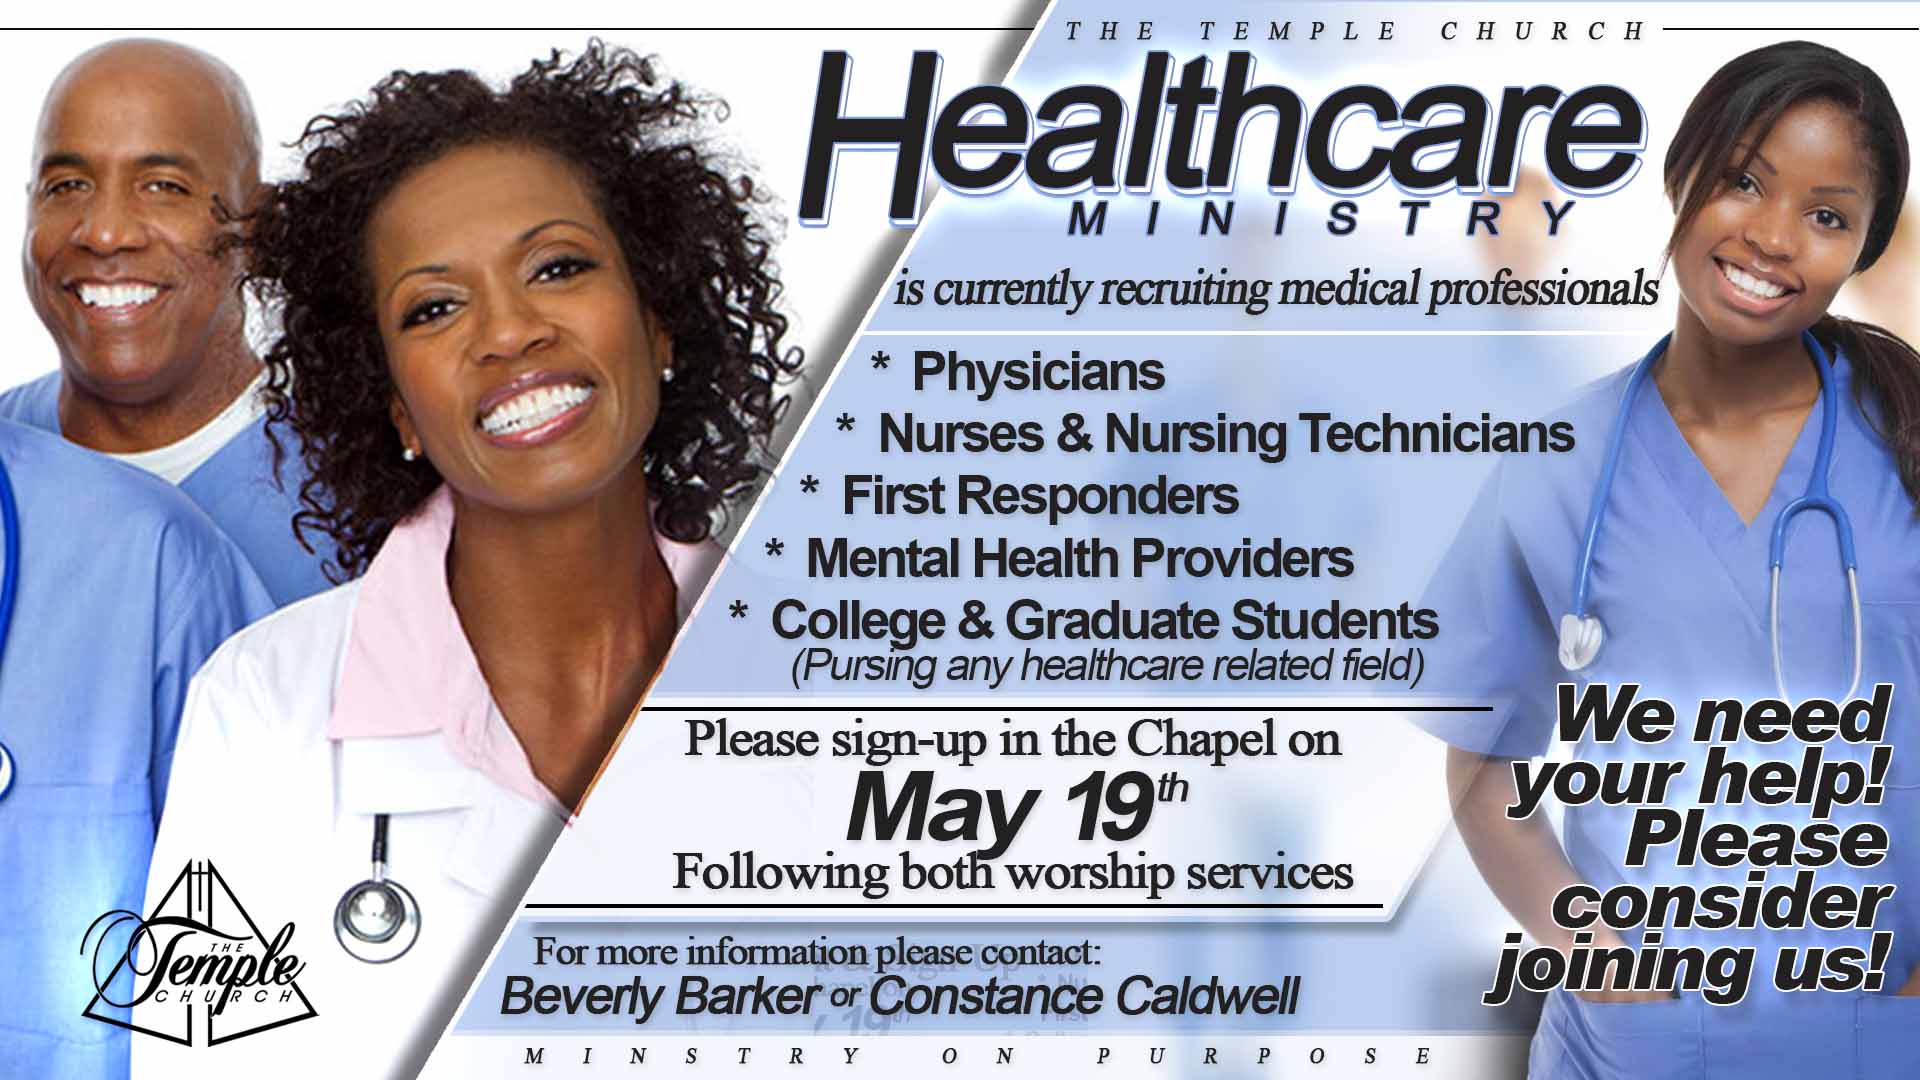 HEALTHCARE MINISTRY